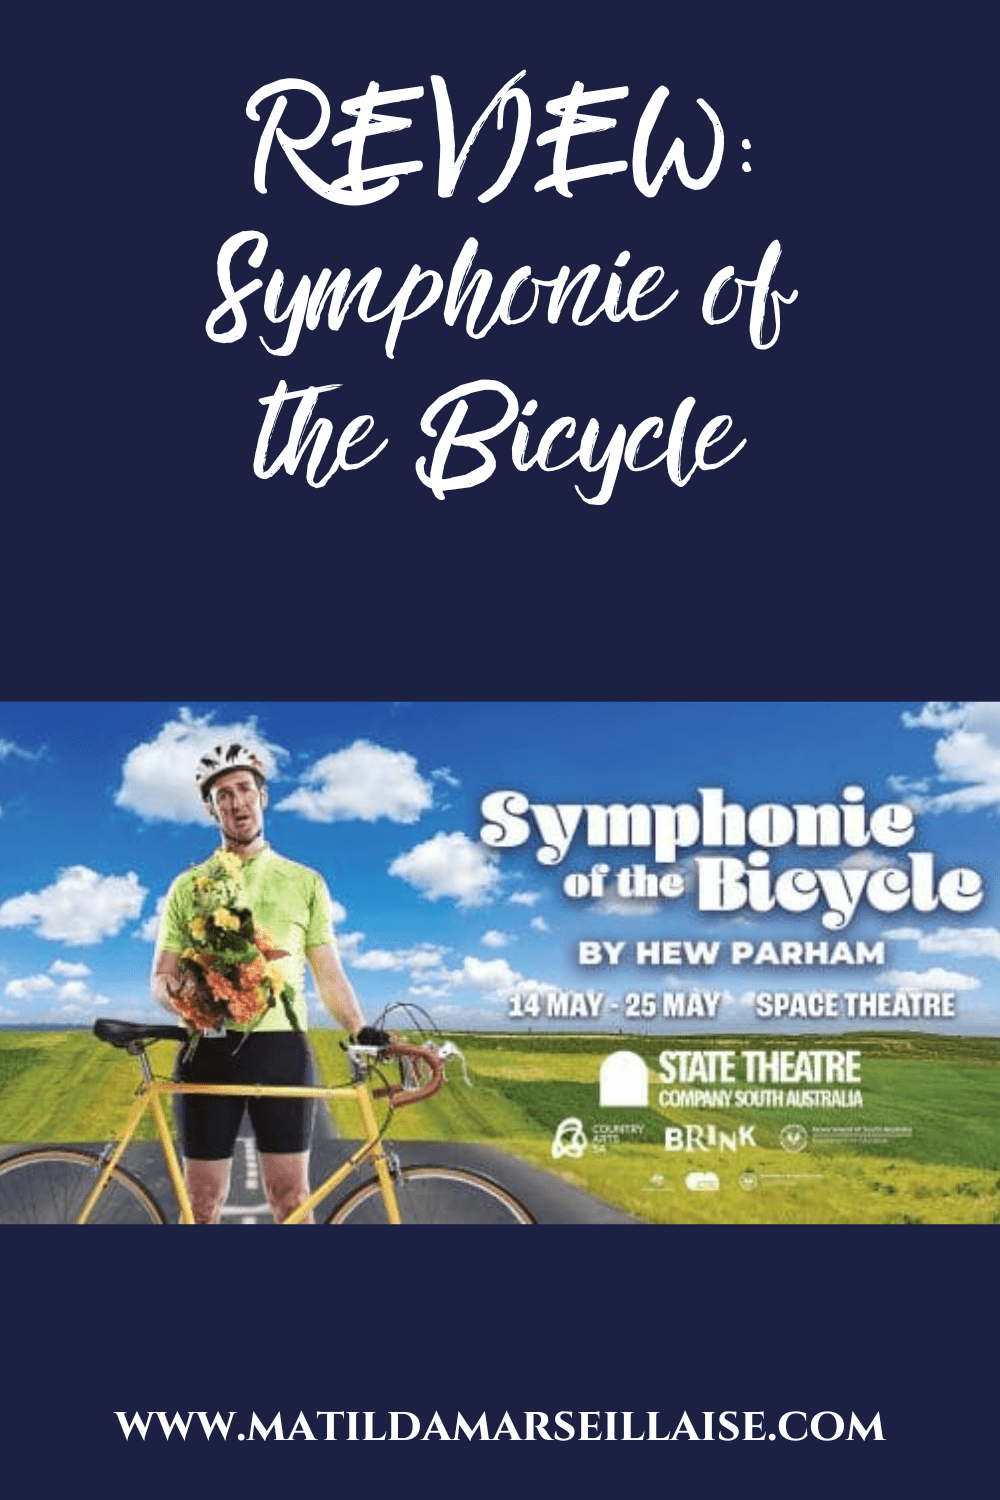 Symphonie of the bicycle: you’d be bonking mad to miss it